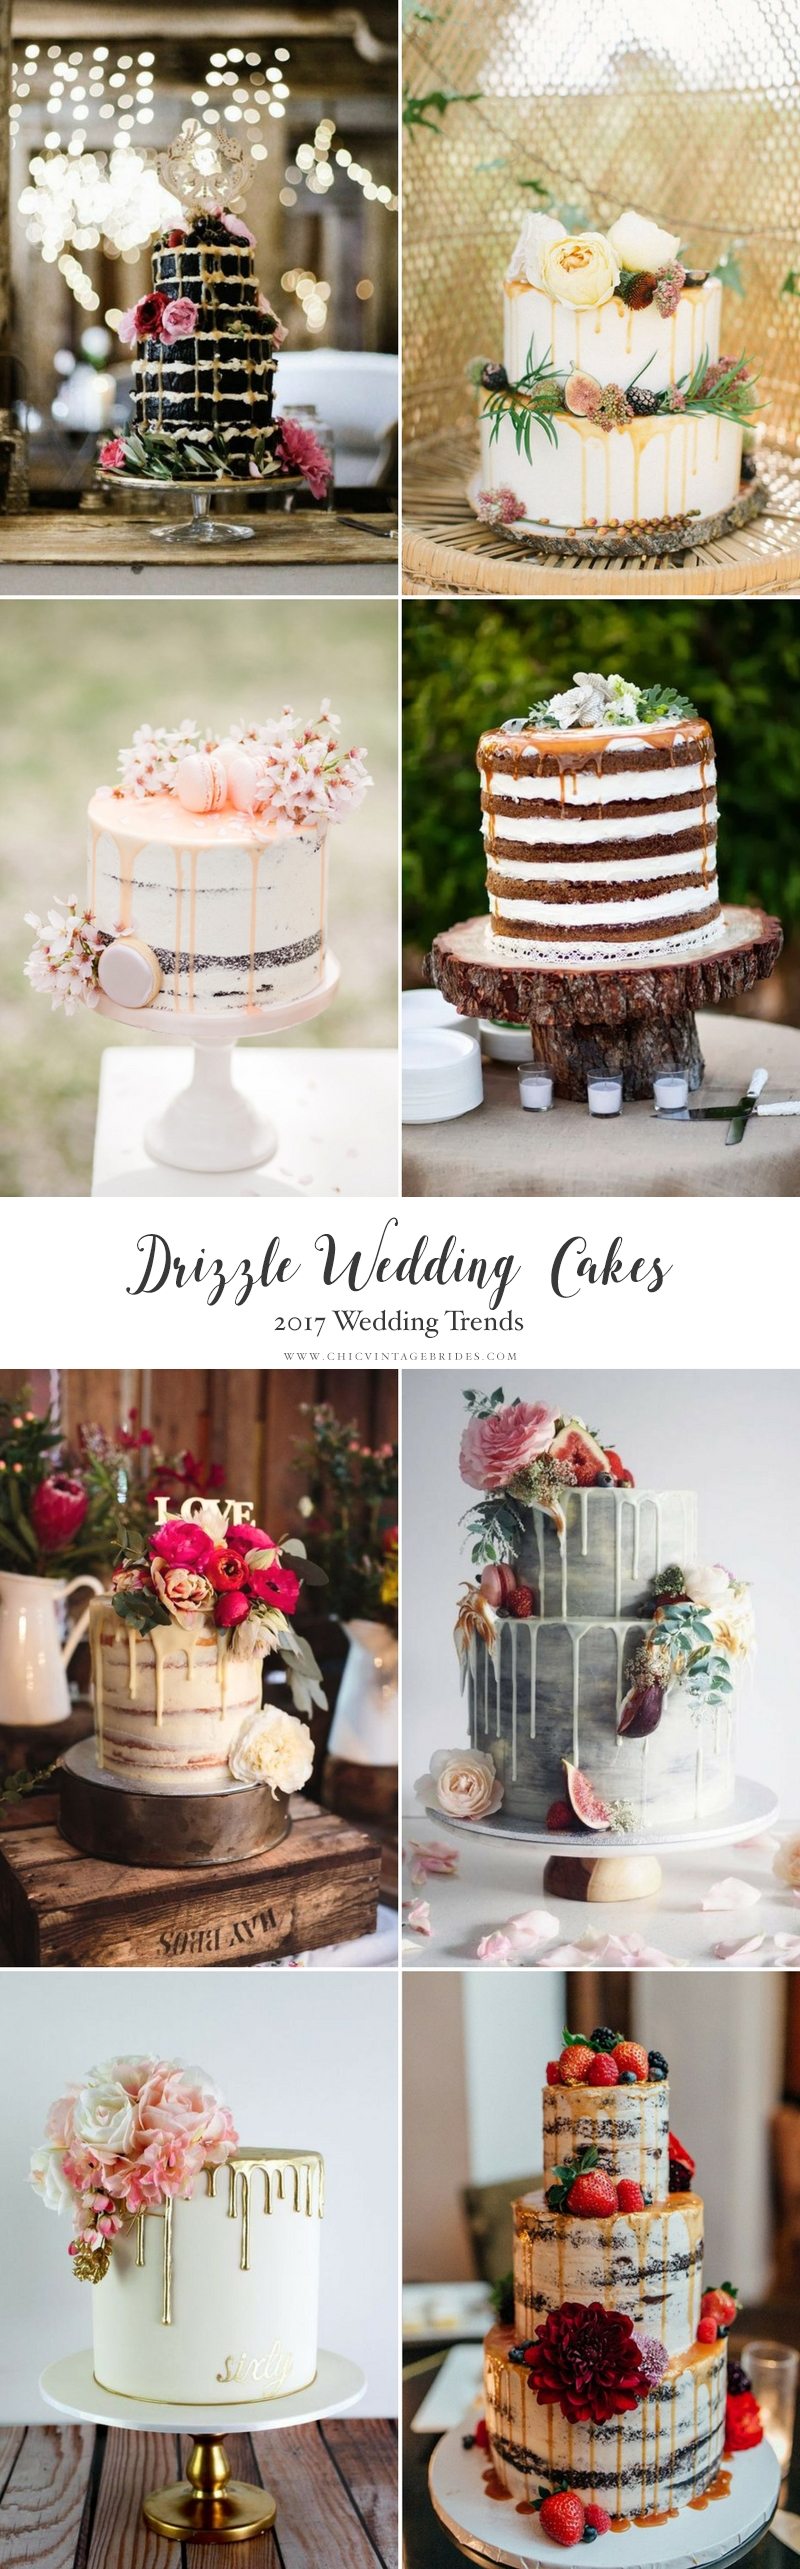 Top Wedding Trends 2017 - Drizzle Wedding Cakes